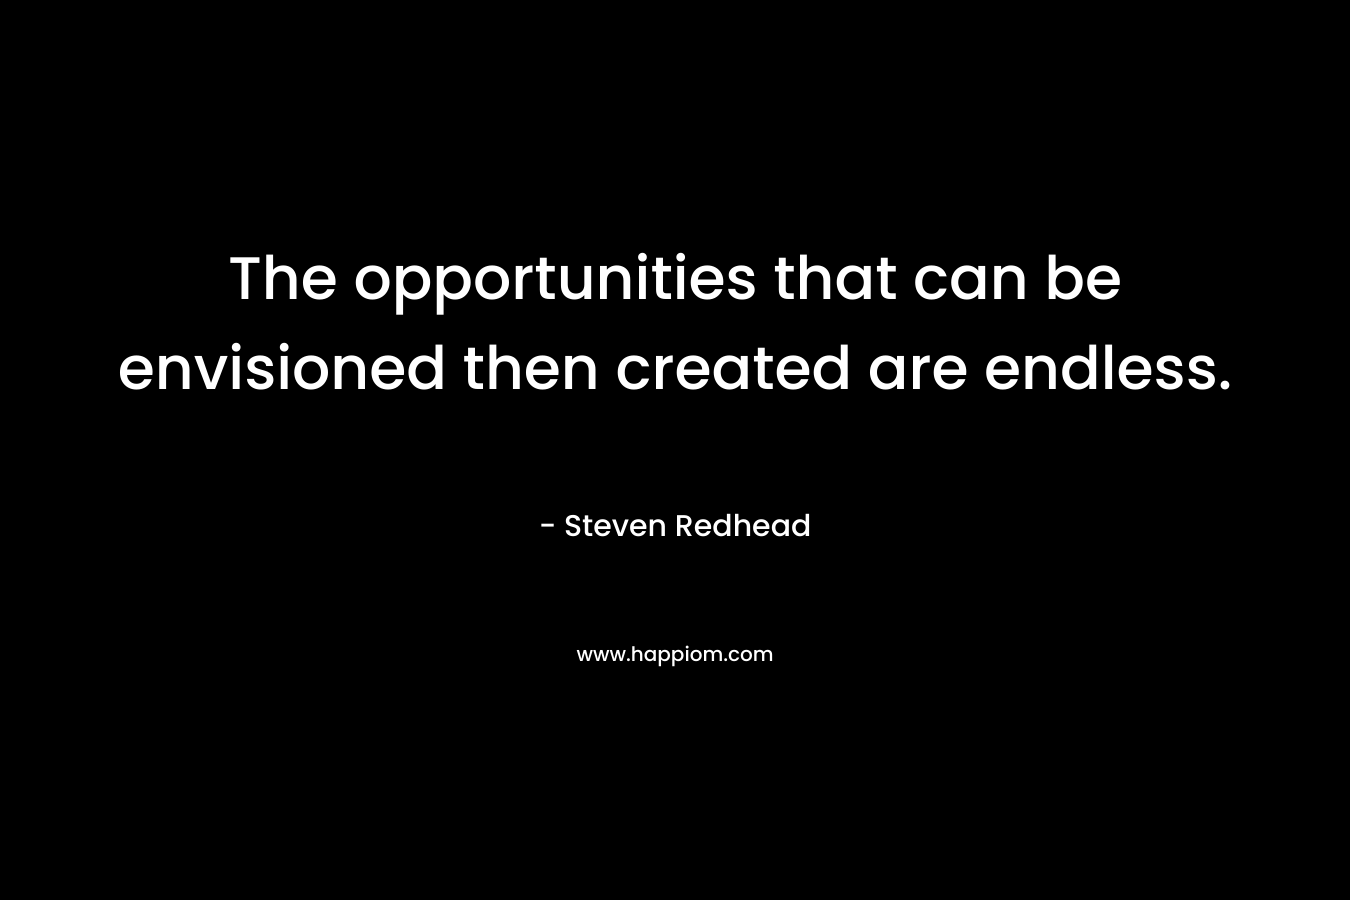 The opportunities that can be envisioned then created are endless. – Steven Redhead